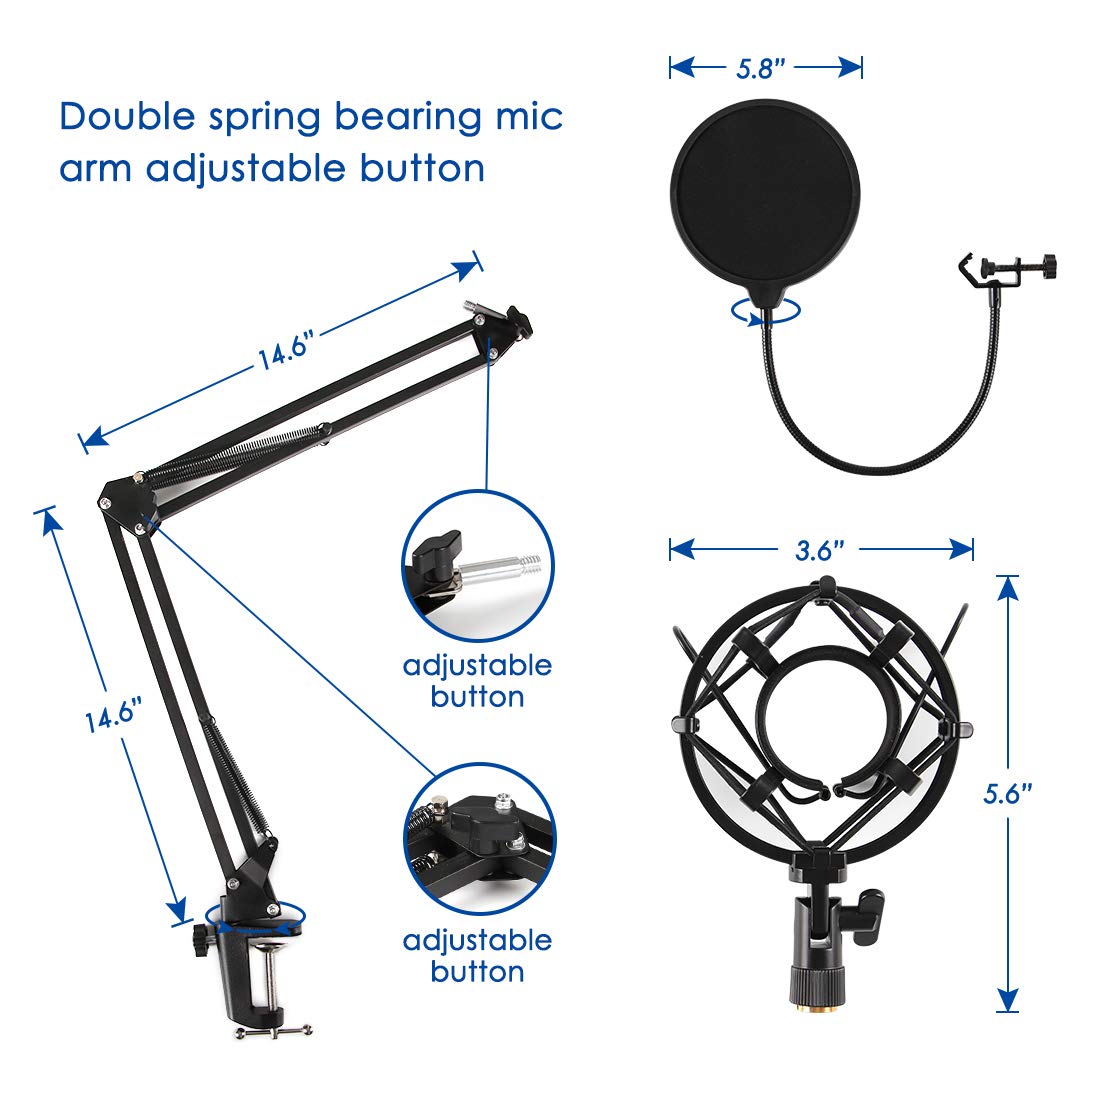 Yakomon USB Streaming Podcast Microphone Kit, Professional 192KHZ/24Bit Studio Cardioid Condenser Computer PC Mic Kit with Scissor Arm Shock Mount Stand Pop Filter for Music Recording,YouTube